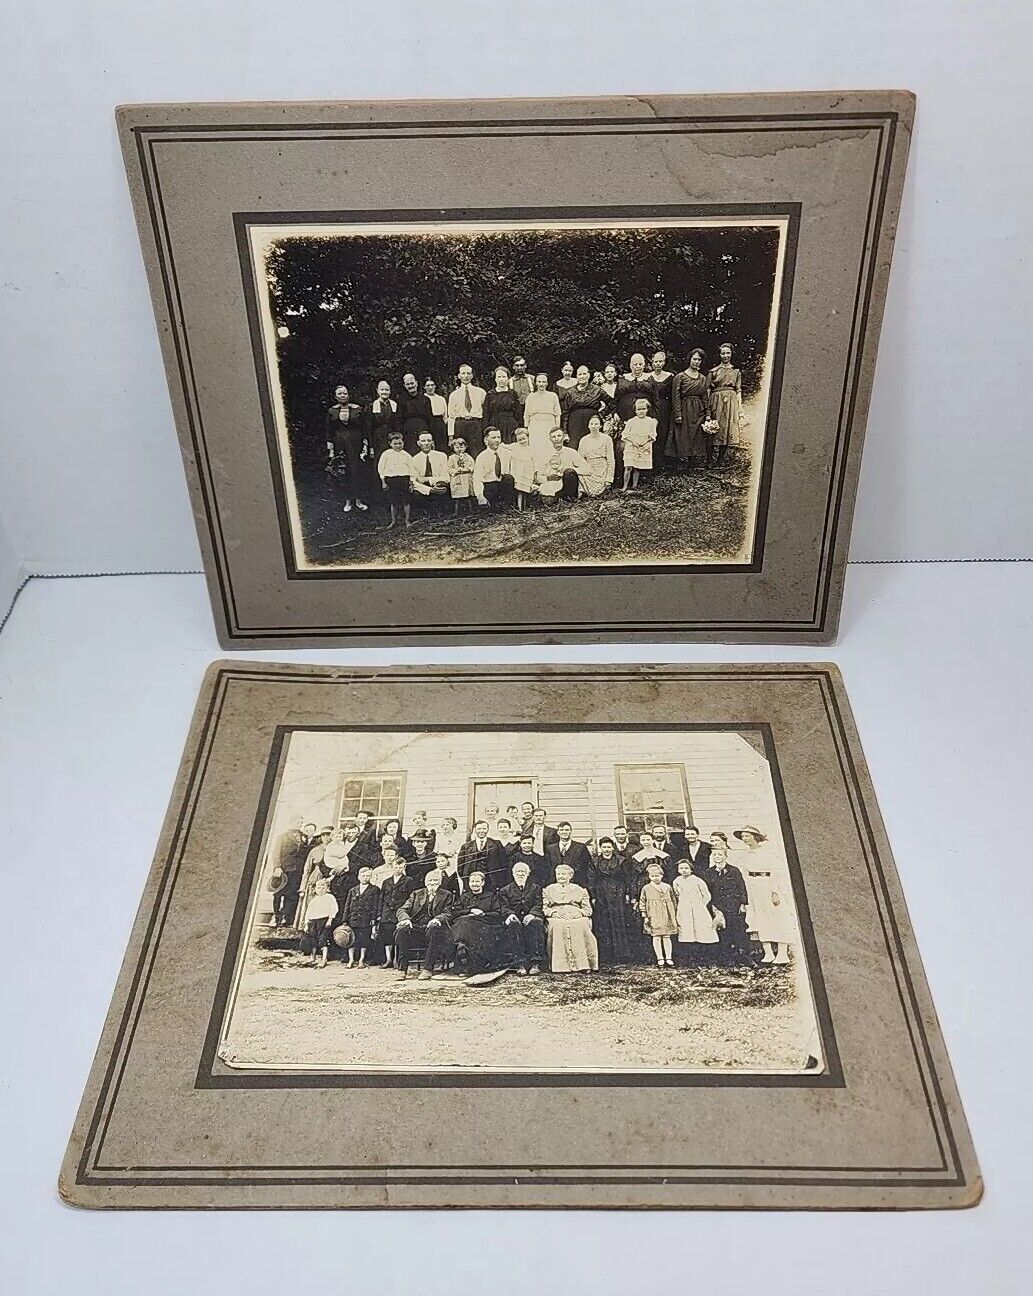 2 Antique Cabinet Card Group Photo Family Reunion Men Women Early 1900s 8x10 Vtg